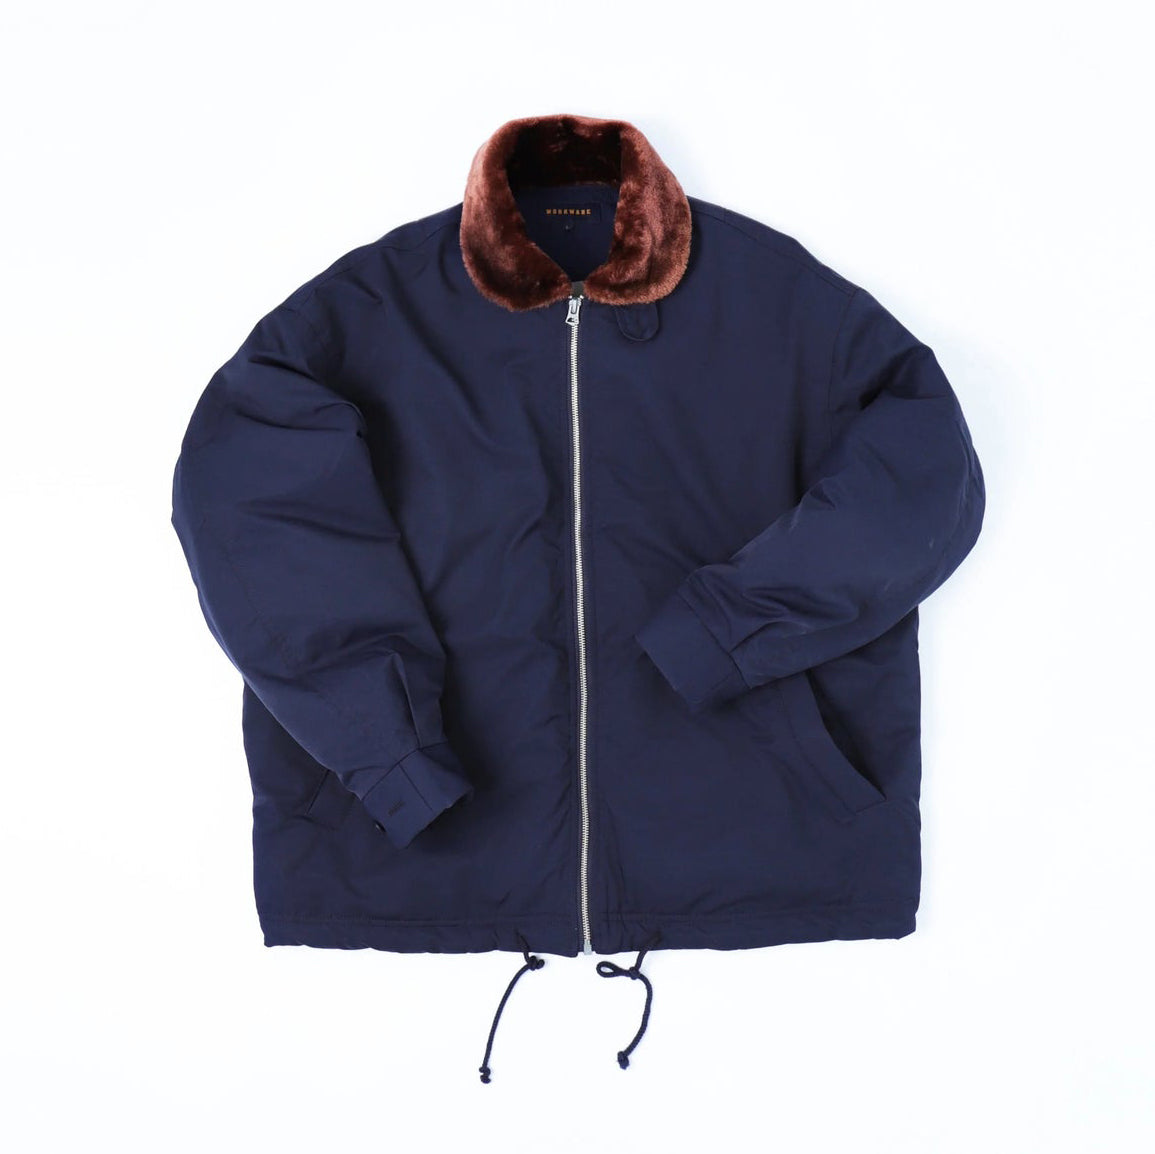 No:#601 | Name:FW23-N1 DECK JACKET | Color:Navy | Size:M/L【WORKWARE】